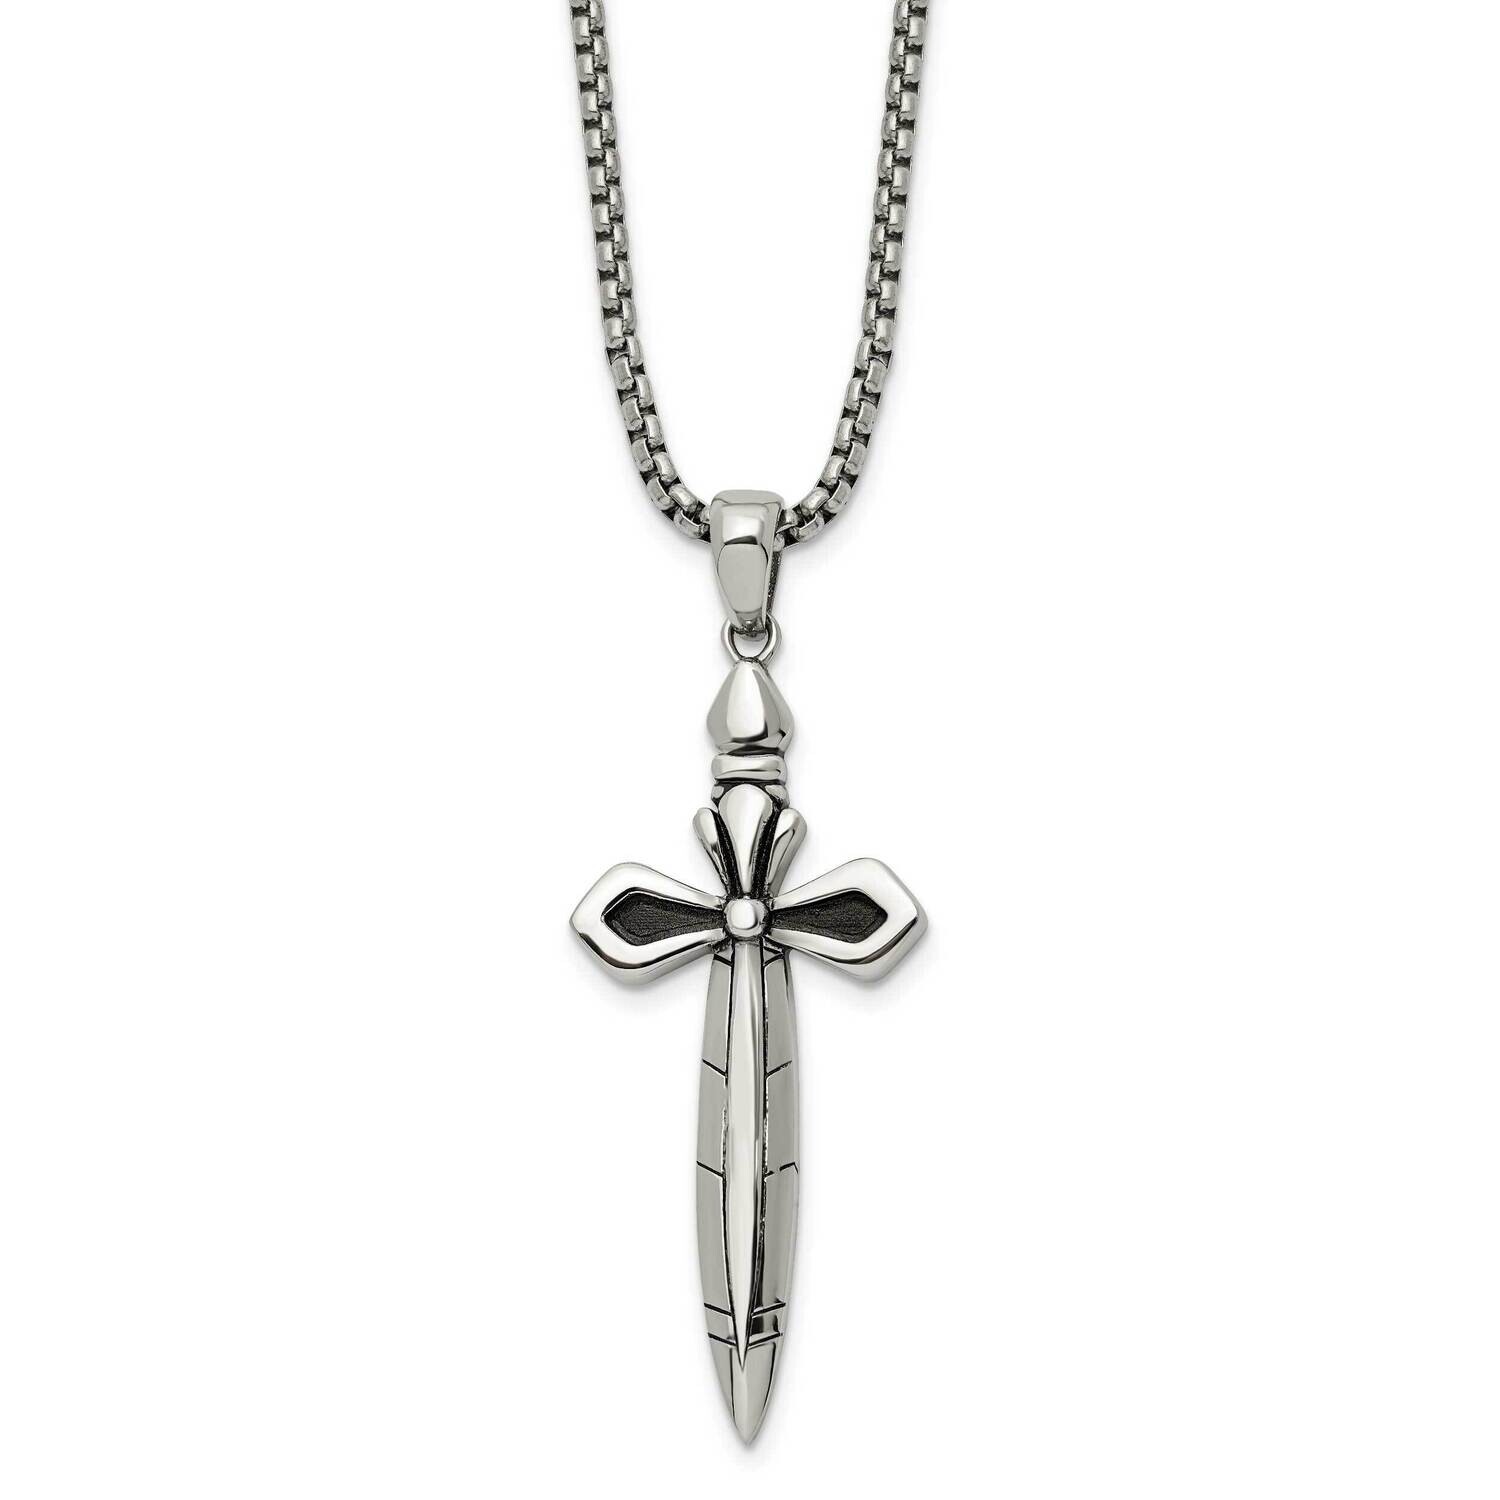 Chisel Antiqued Polished Cross Sword Pendant On A 24 Inch Box Chain Necklace Stainless Steel SRN3031-24